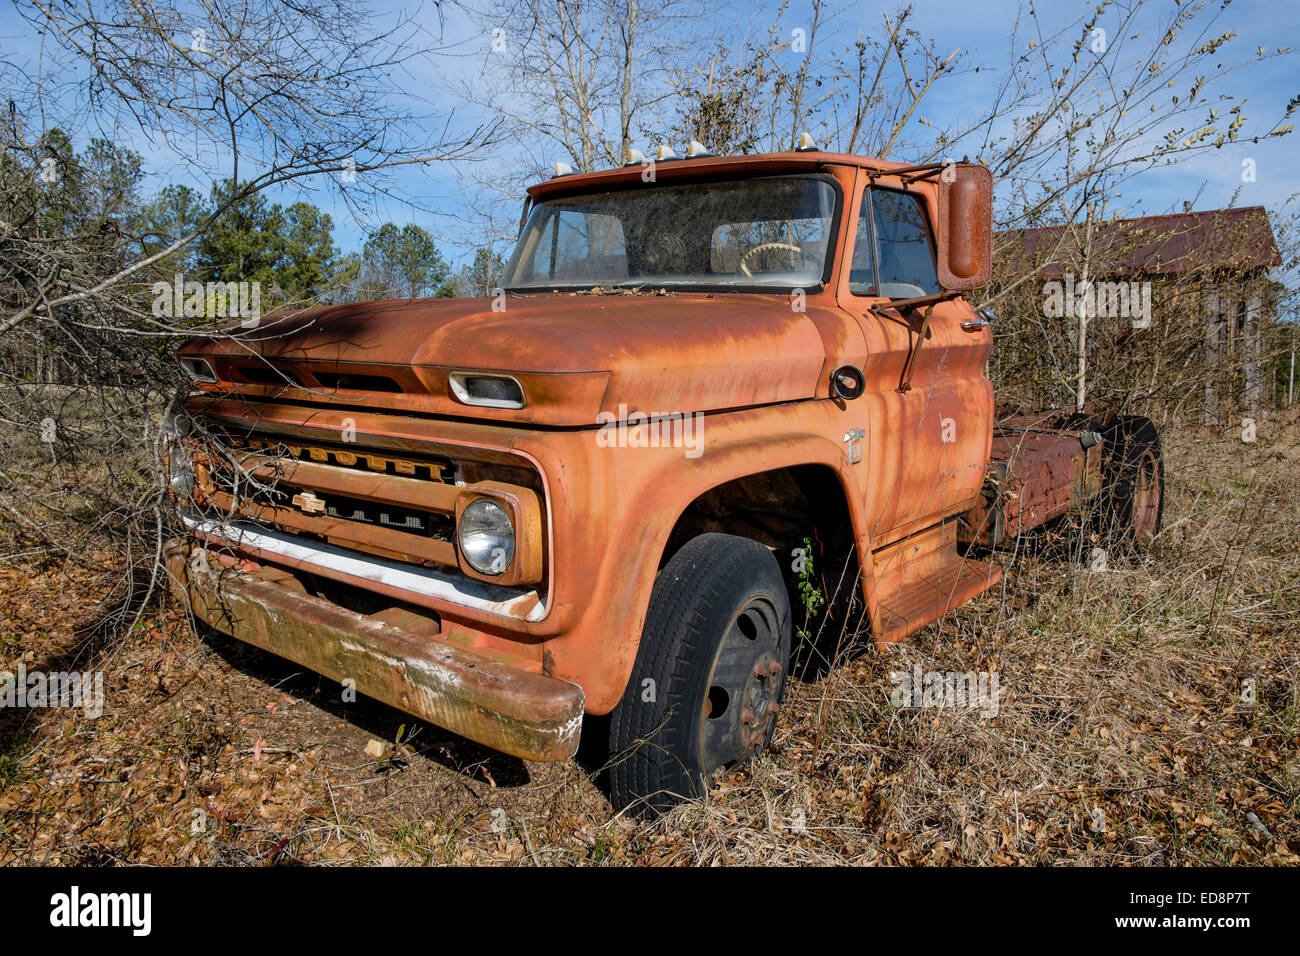 Abandoned 1960s vintage Chevy C10 truck in a rural Alabama field, USA. Stock Photo